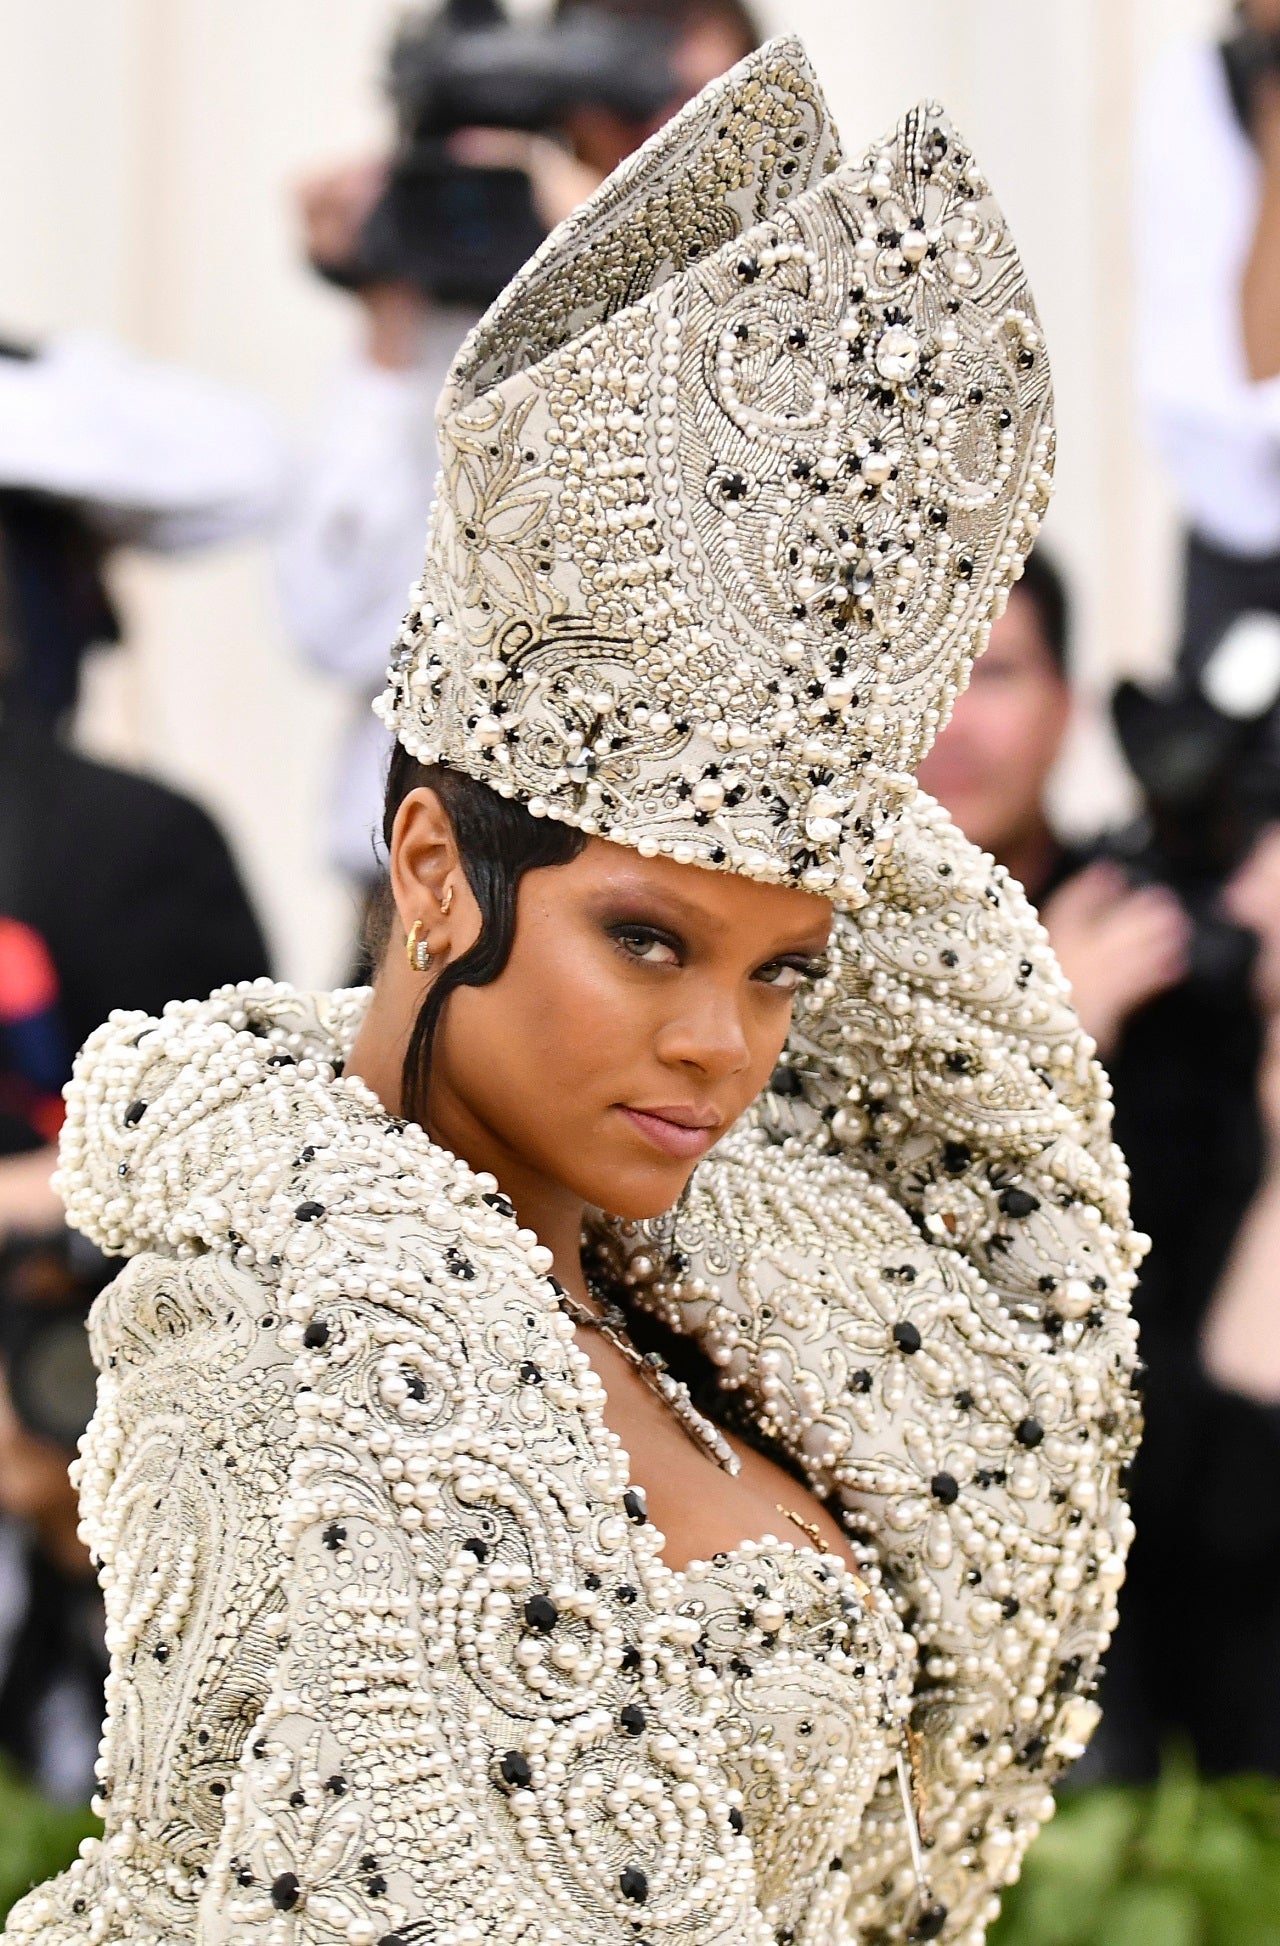 The 2021 Met Gala will require guests be vaccinated, masked indoors